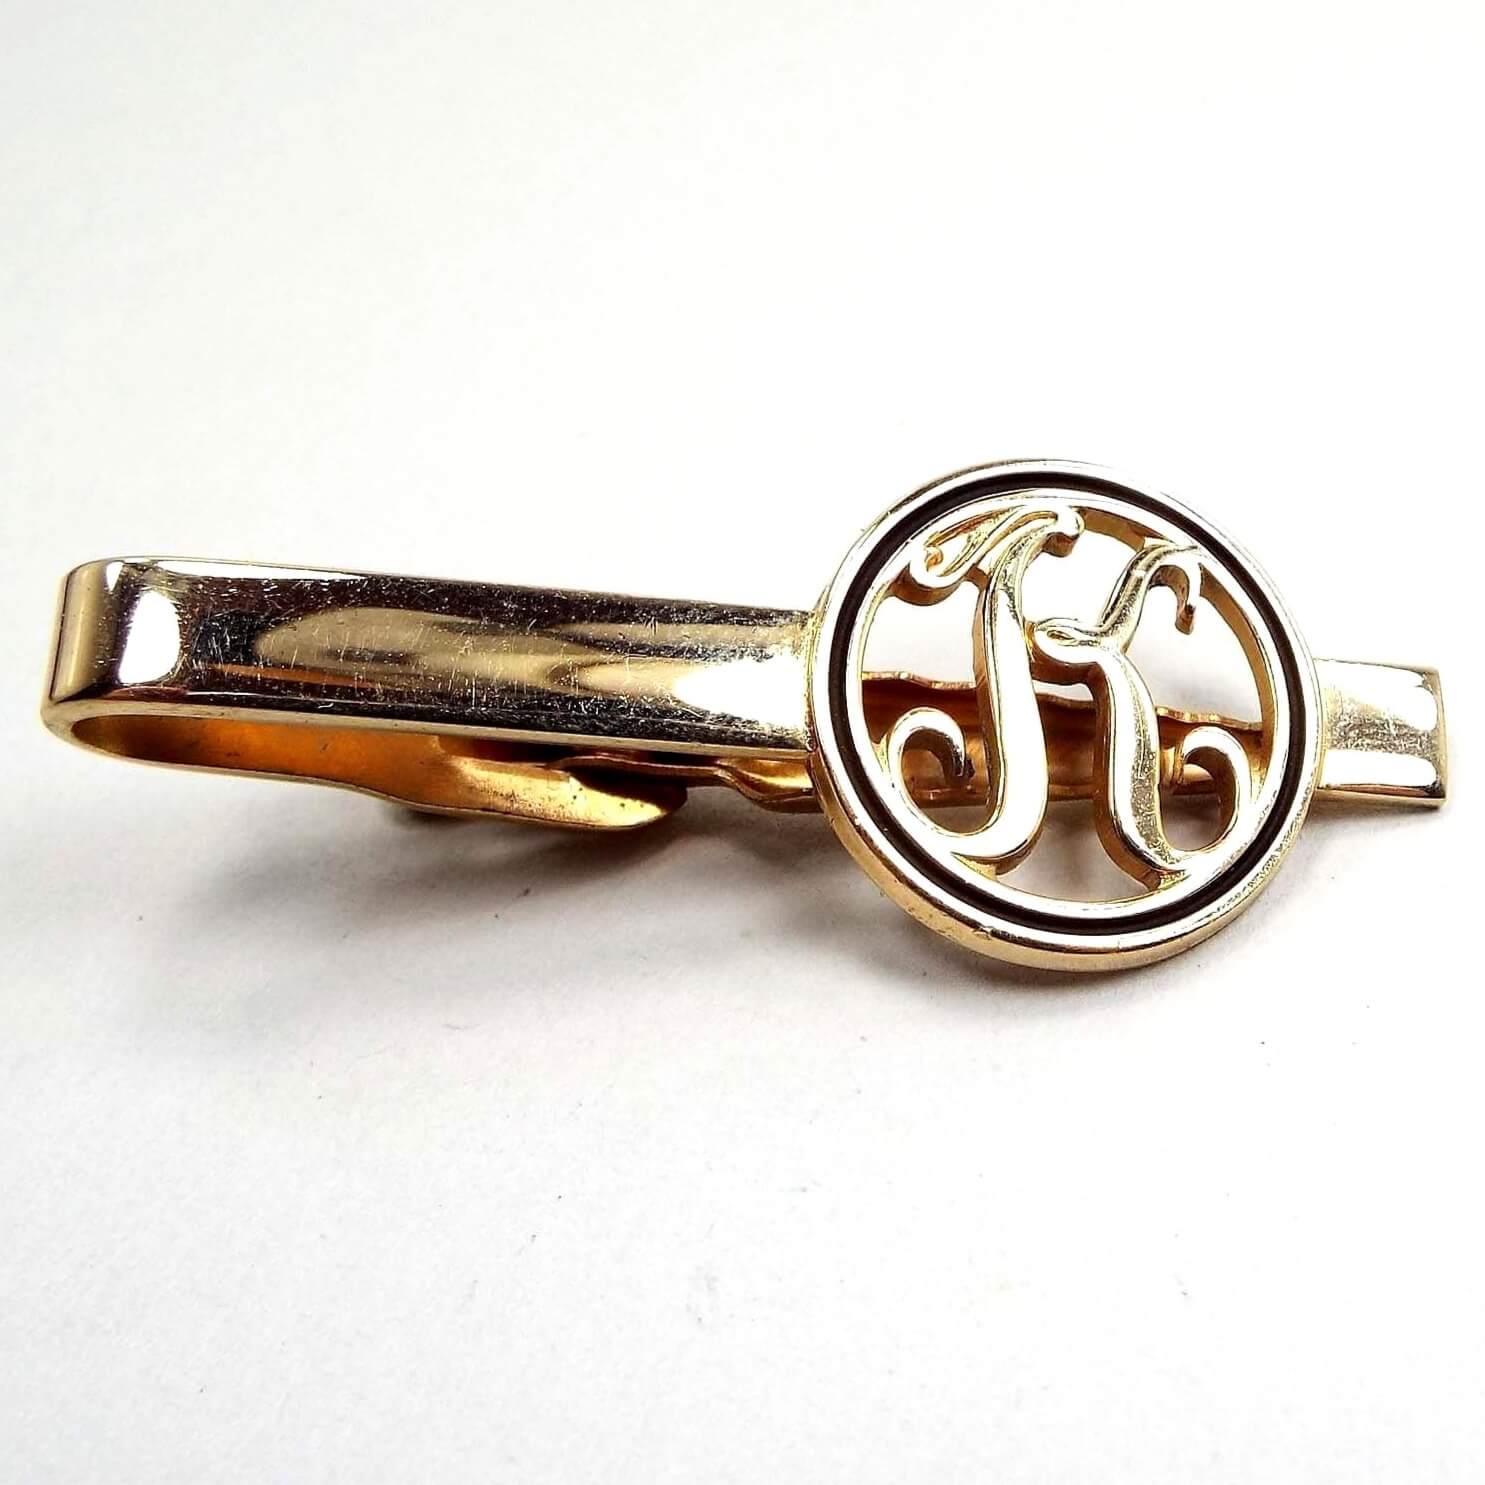 Front view of the retro vintage initial tie clip. It is gold tone in color. The end has an open cut out circle with the letter K inside and has black trim around the edge.